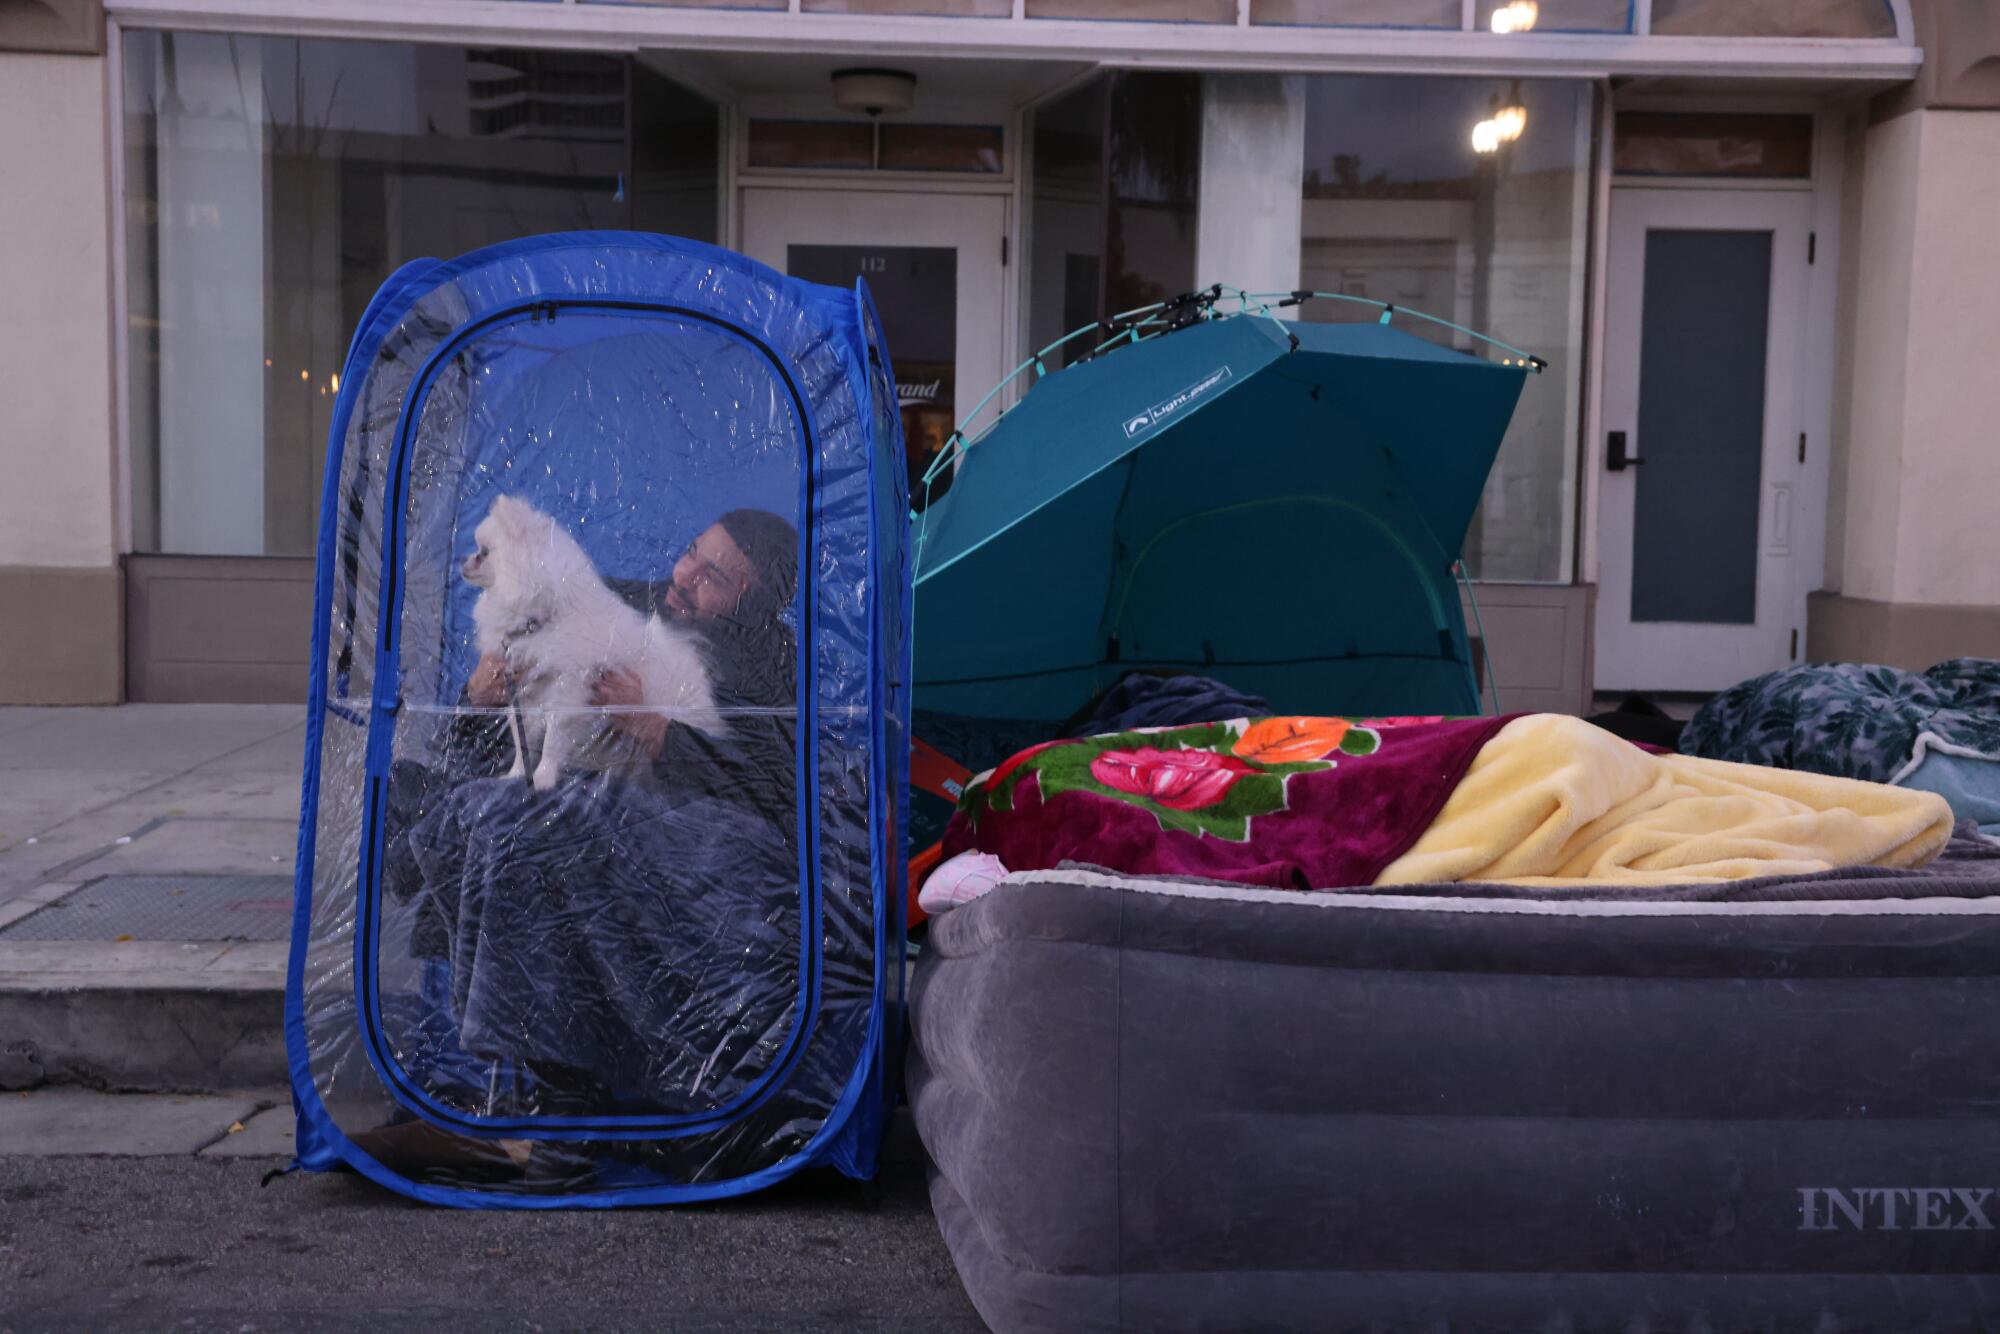 A man with a dog on his lap sits in a plastic container next to an inflatable mattress